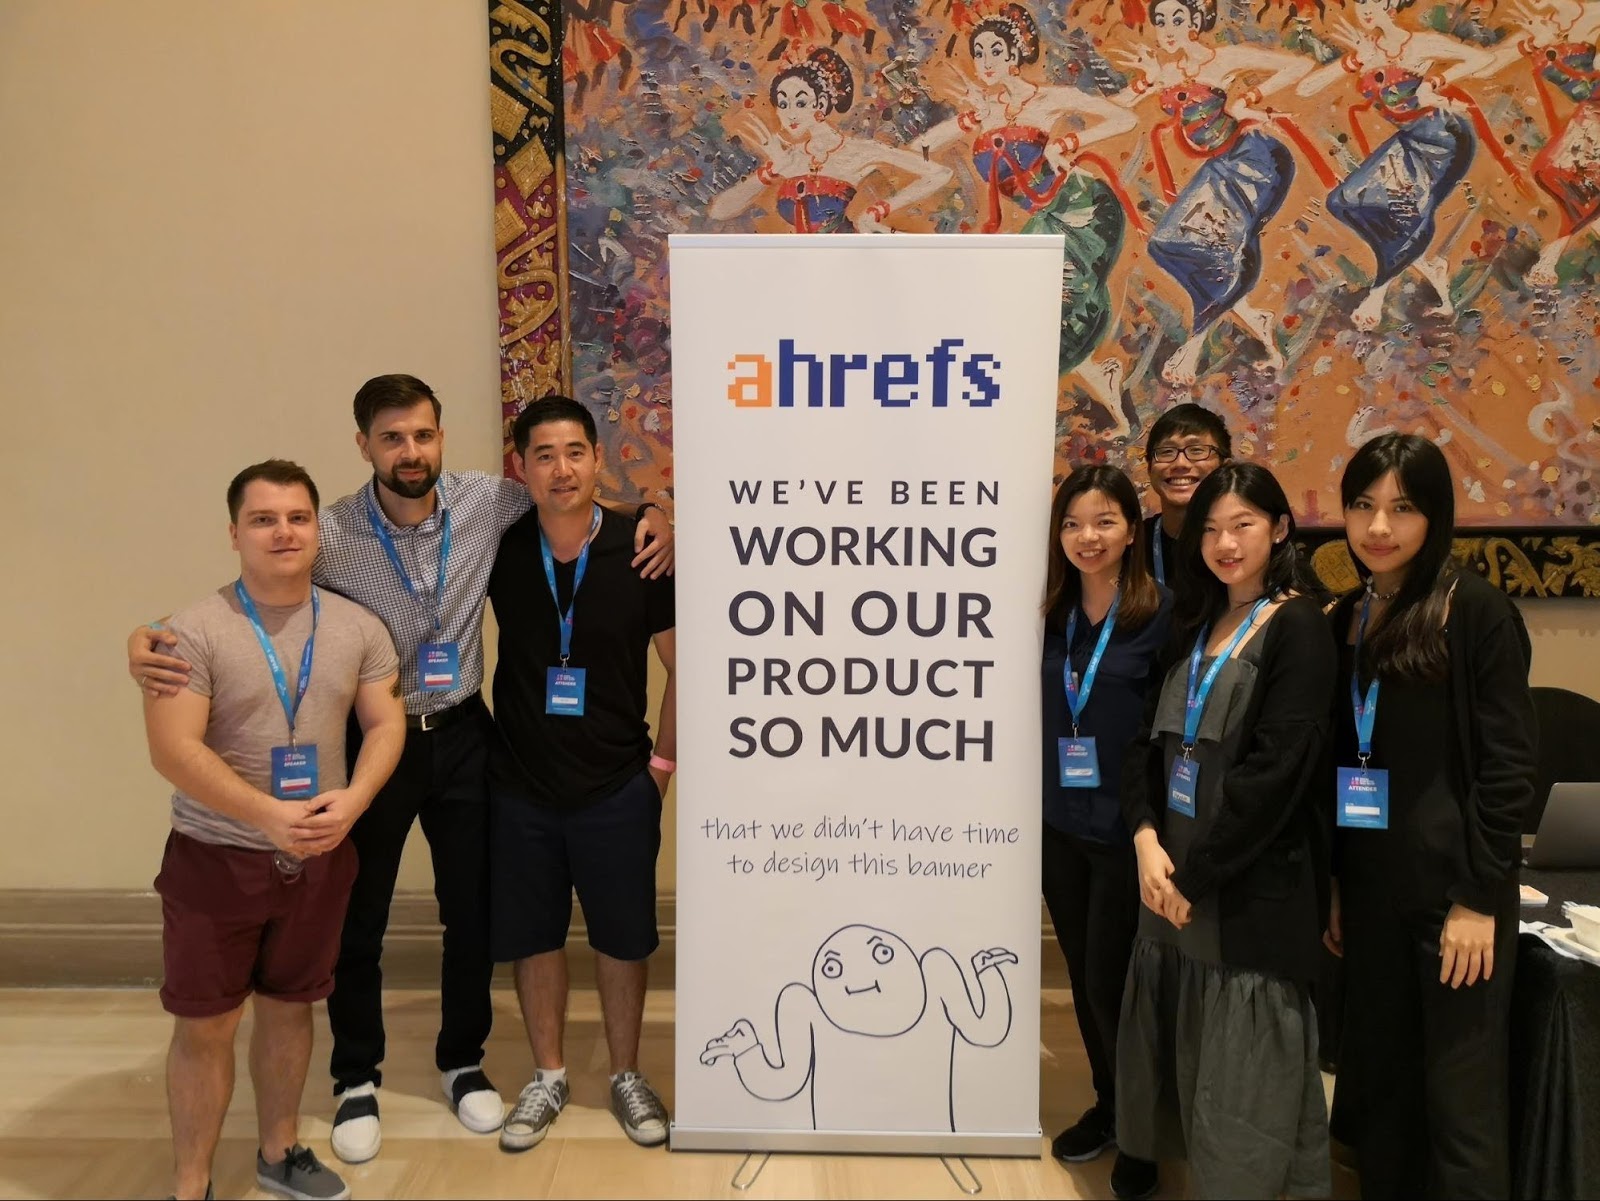 Photo of Ahrefs team and banner with rough sketches on it with words "We've been working on our product so much that we didn't have time to design this banner"